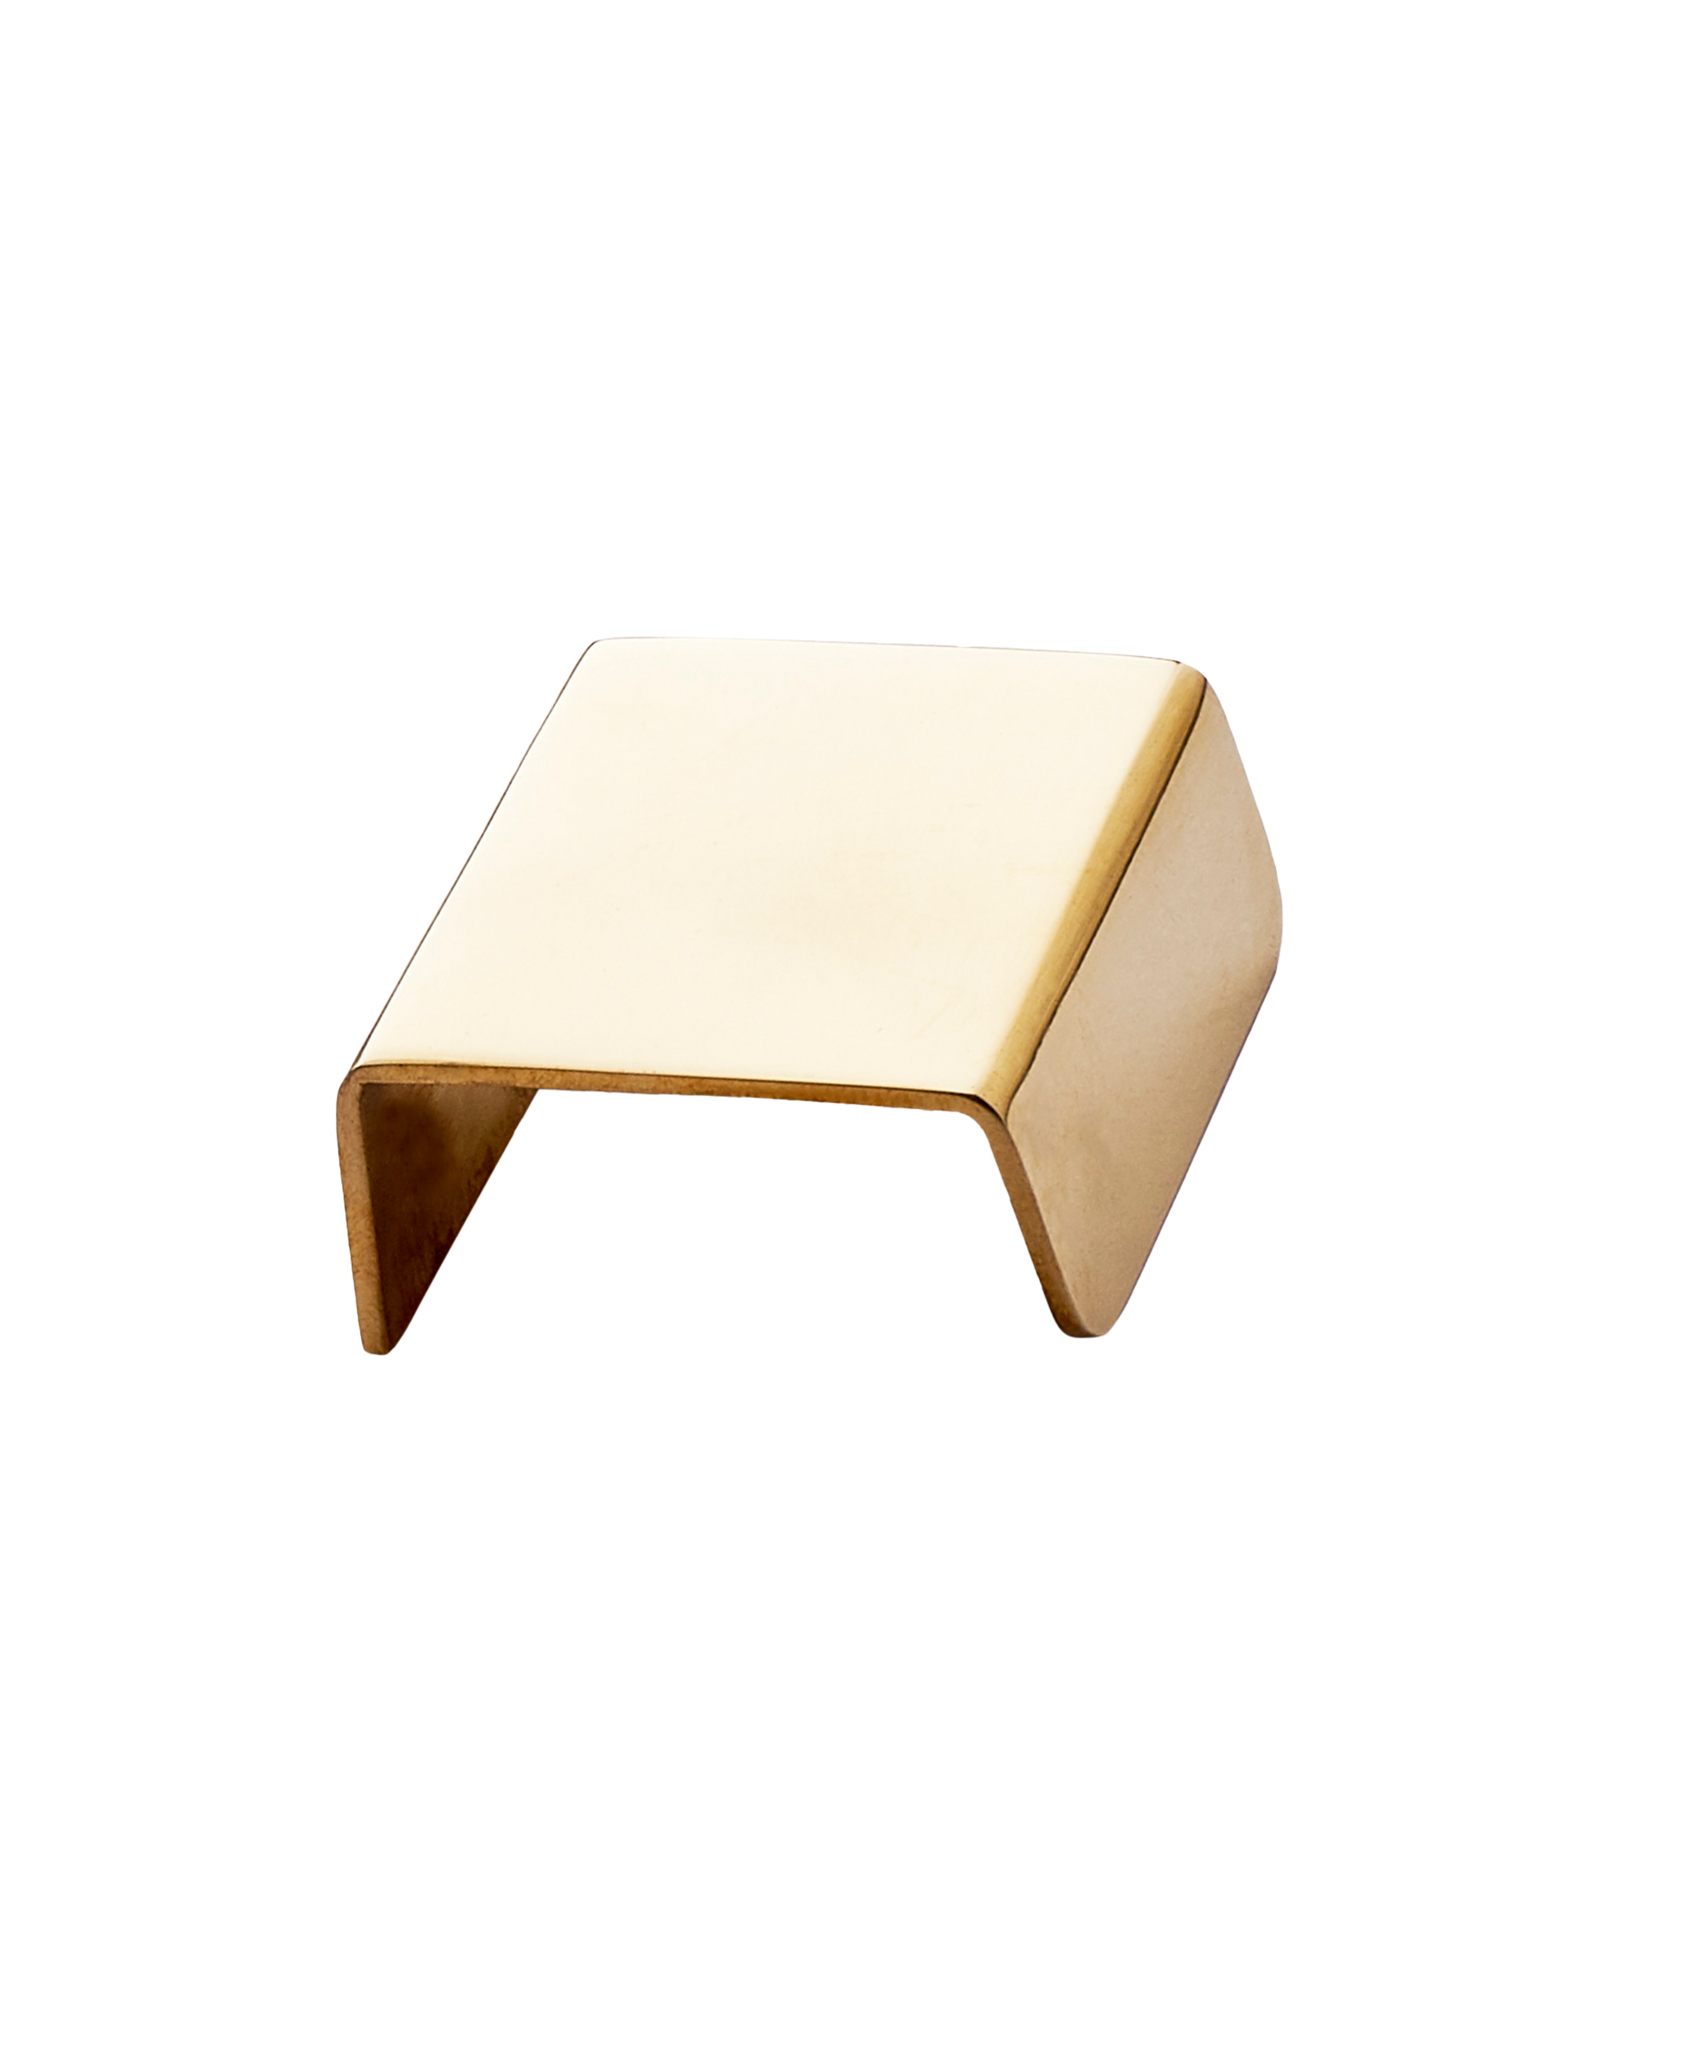 Are you looking for a corner furniture handle in polished brass? -  Competitive price